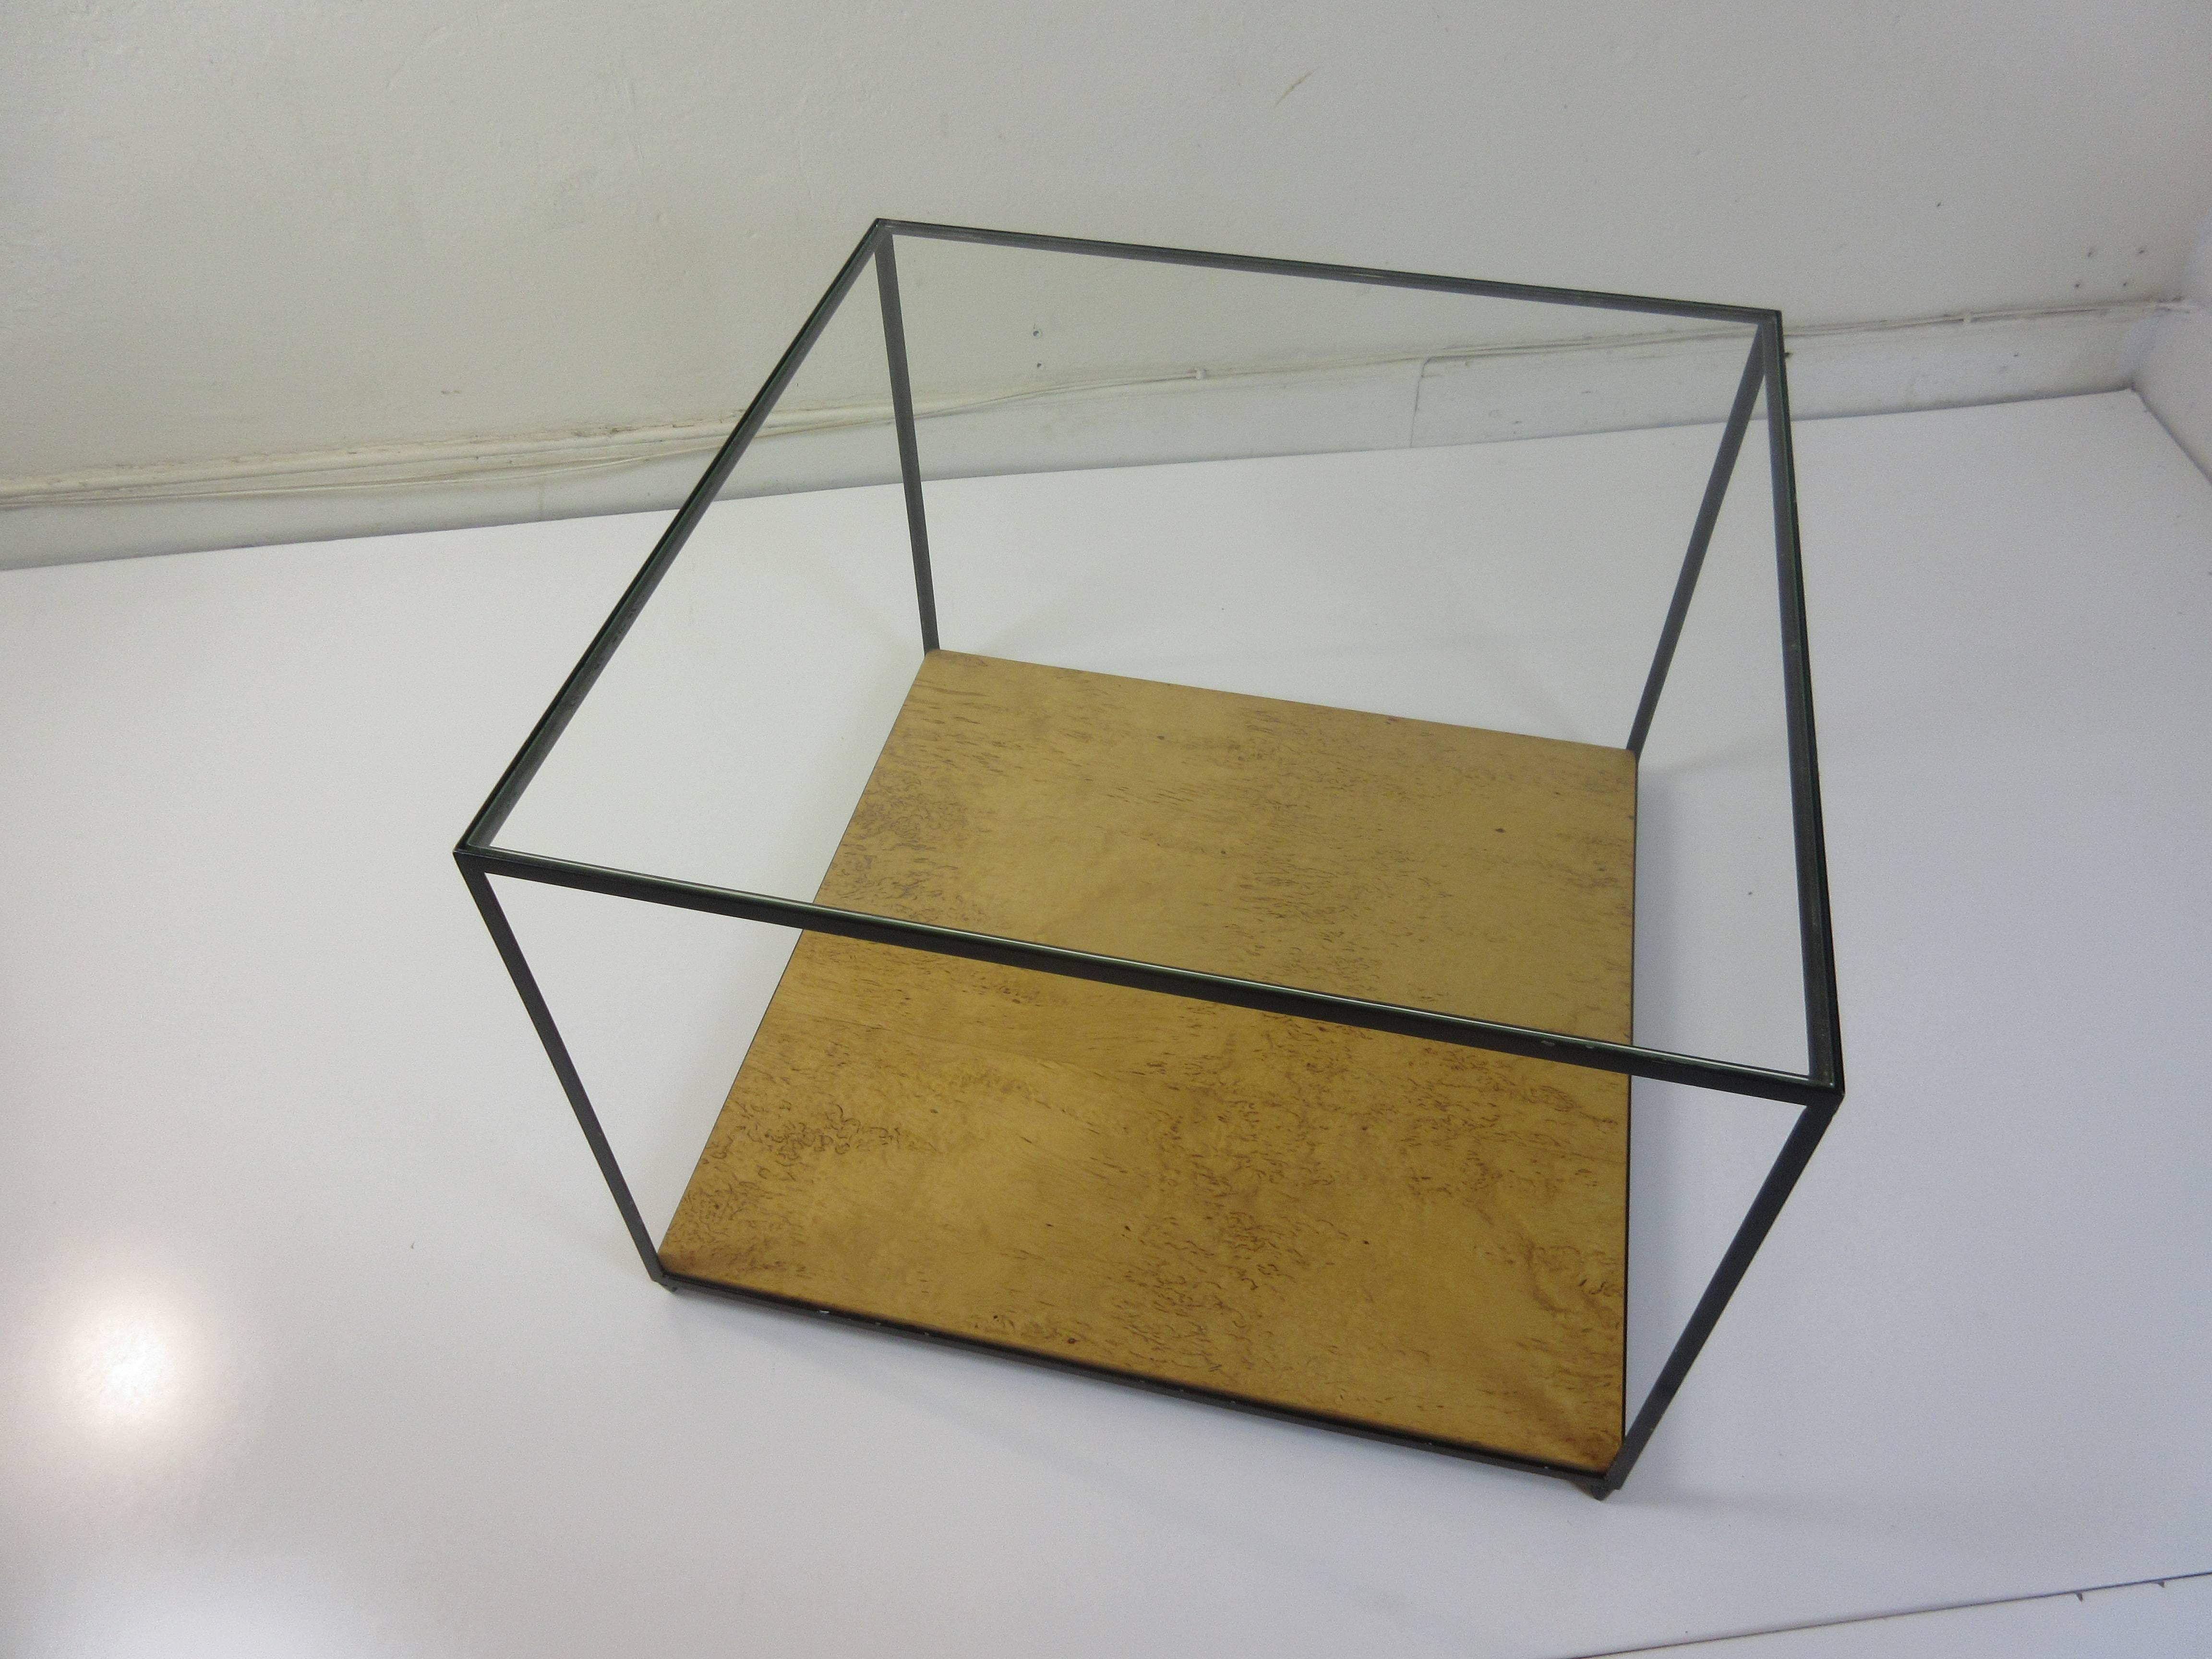 Edward Wormely glass cube coffee table from 1946 with burned in factory mark. Wood bottom shelf is burled birch with black steel frame and glass top.